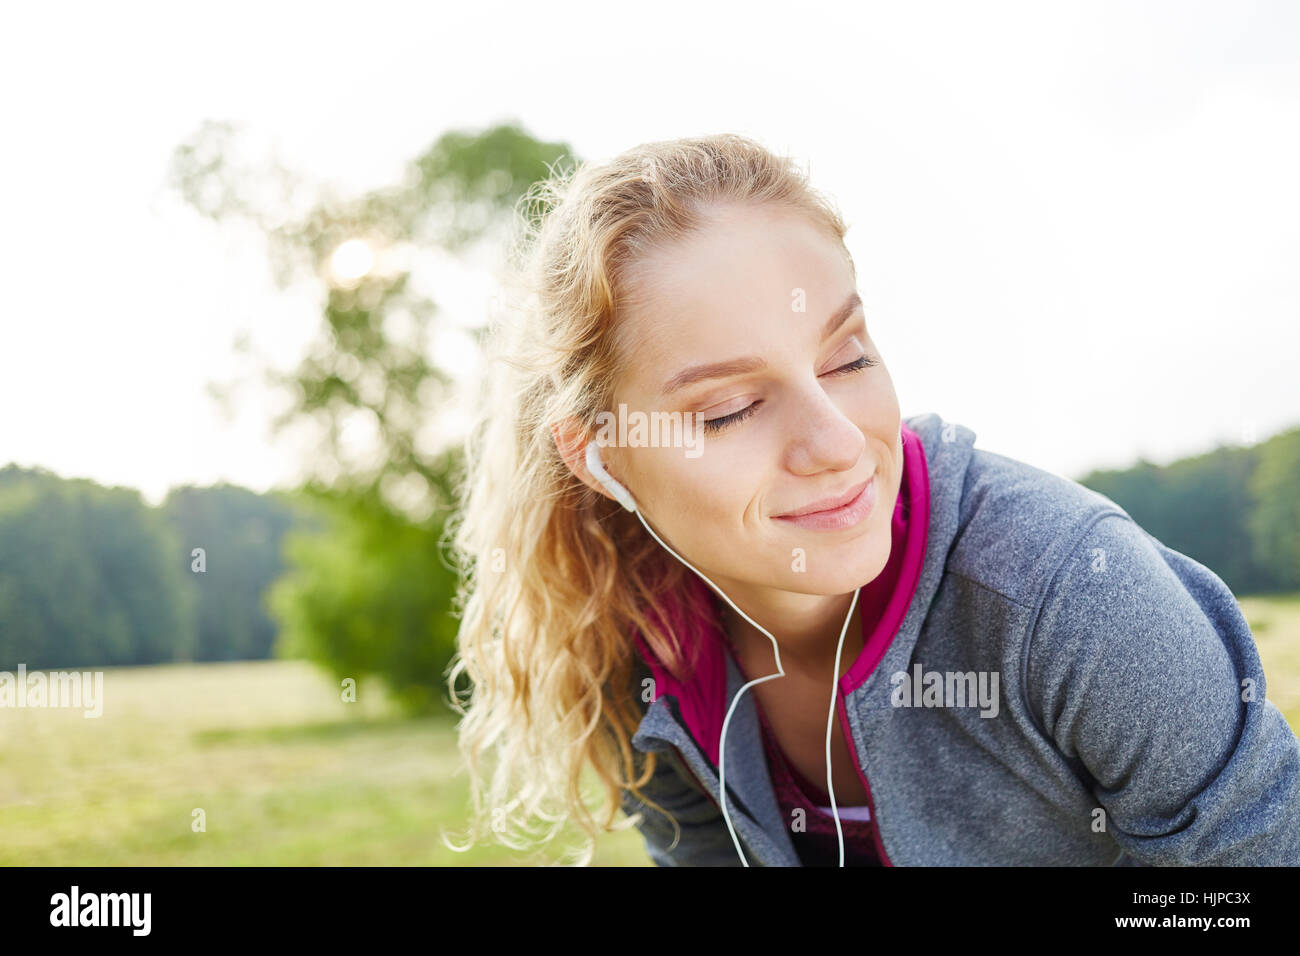 Young woman relaxing and enjoying her break from training Stock Photo